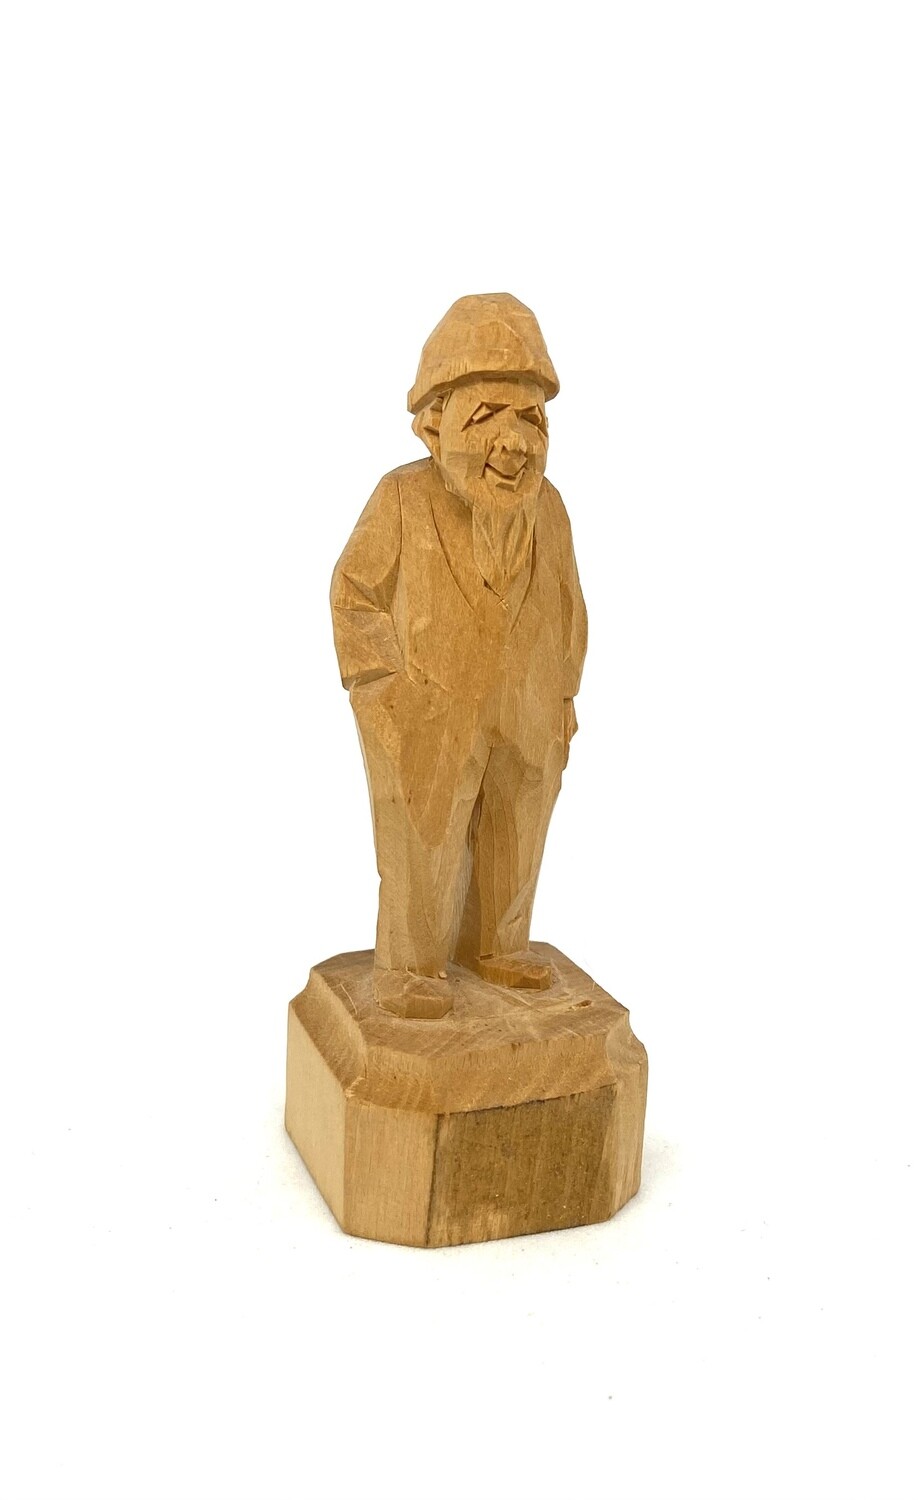 Carved Wooden Old Man with Hand in Pocket 3”